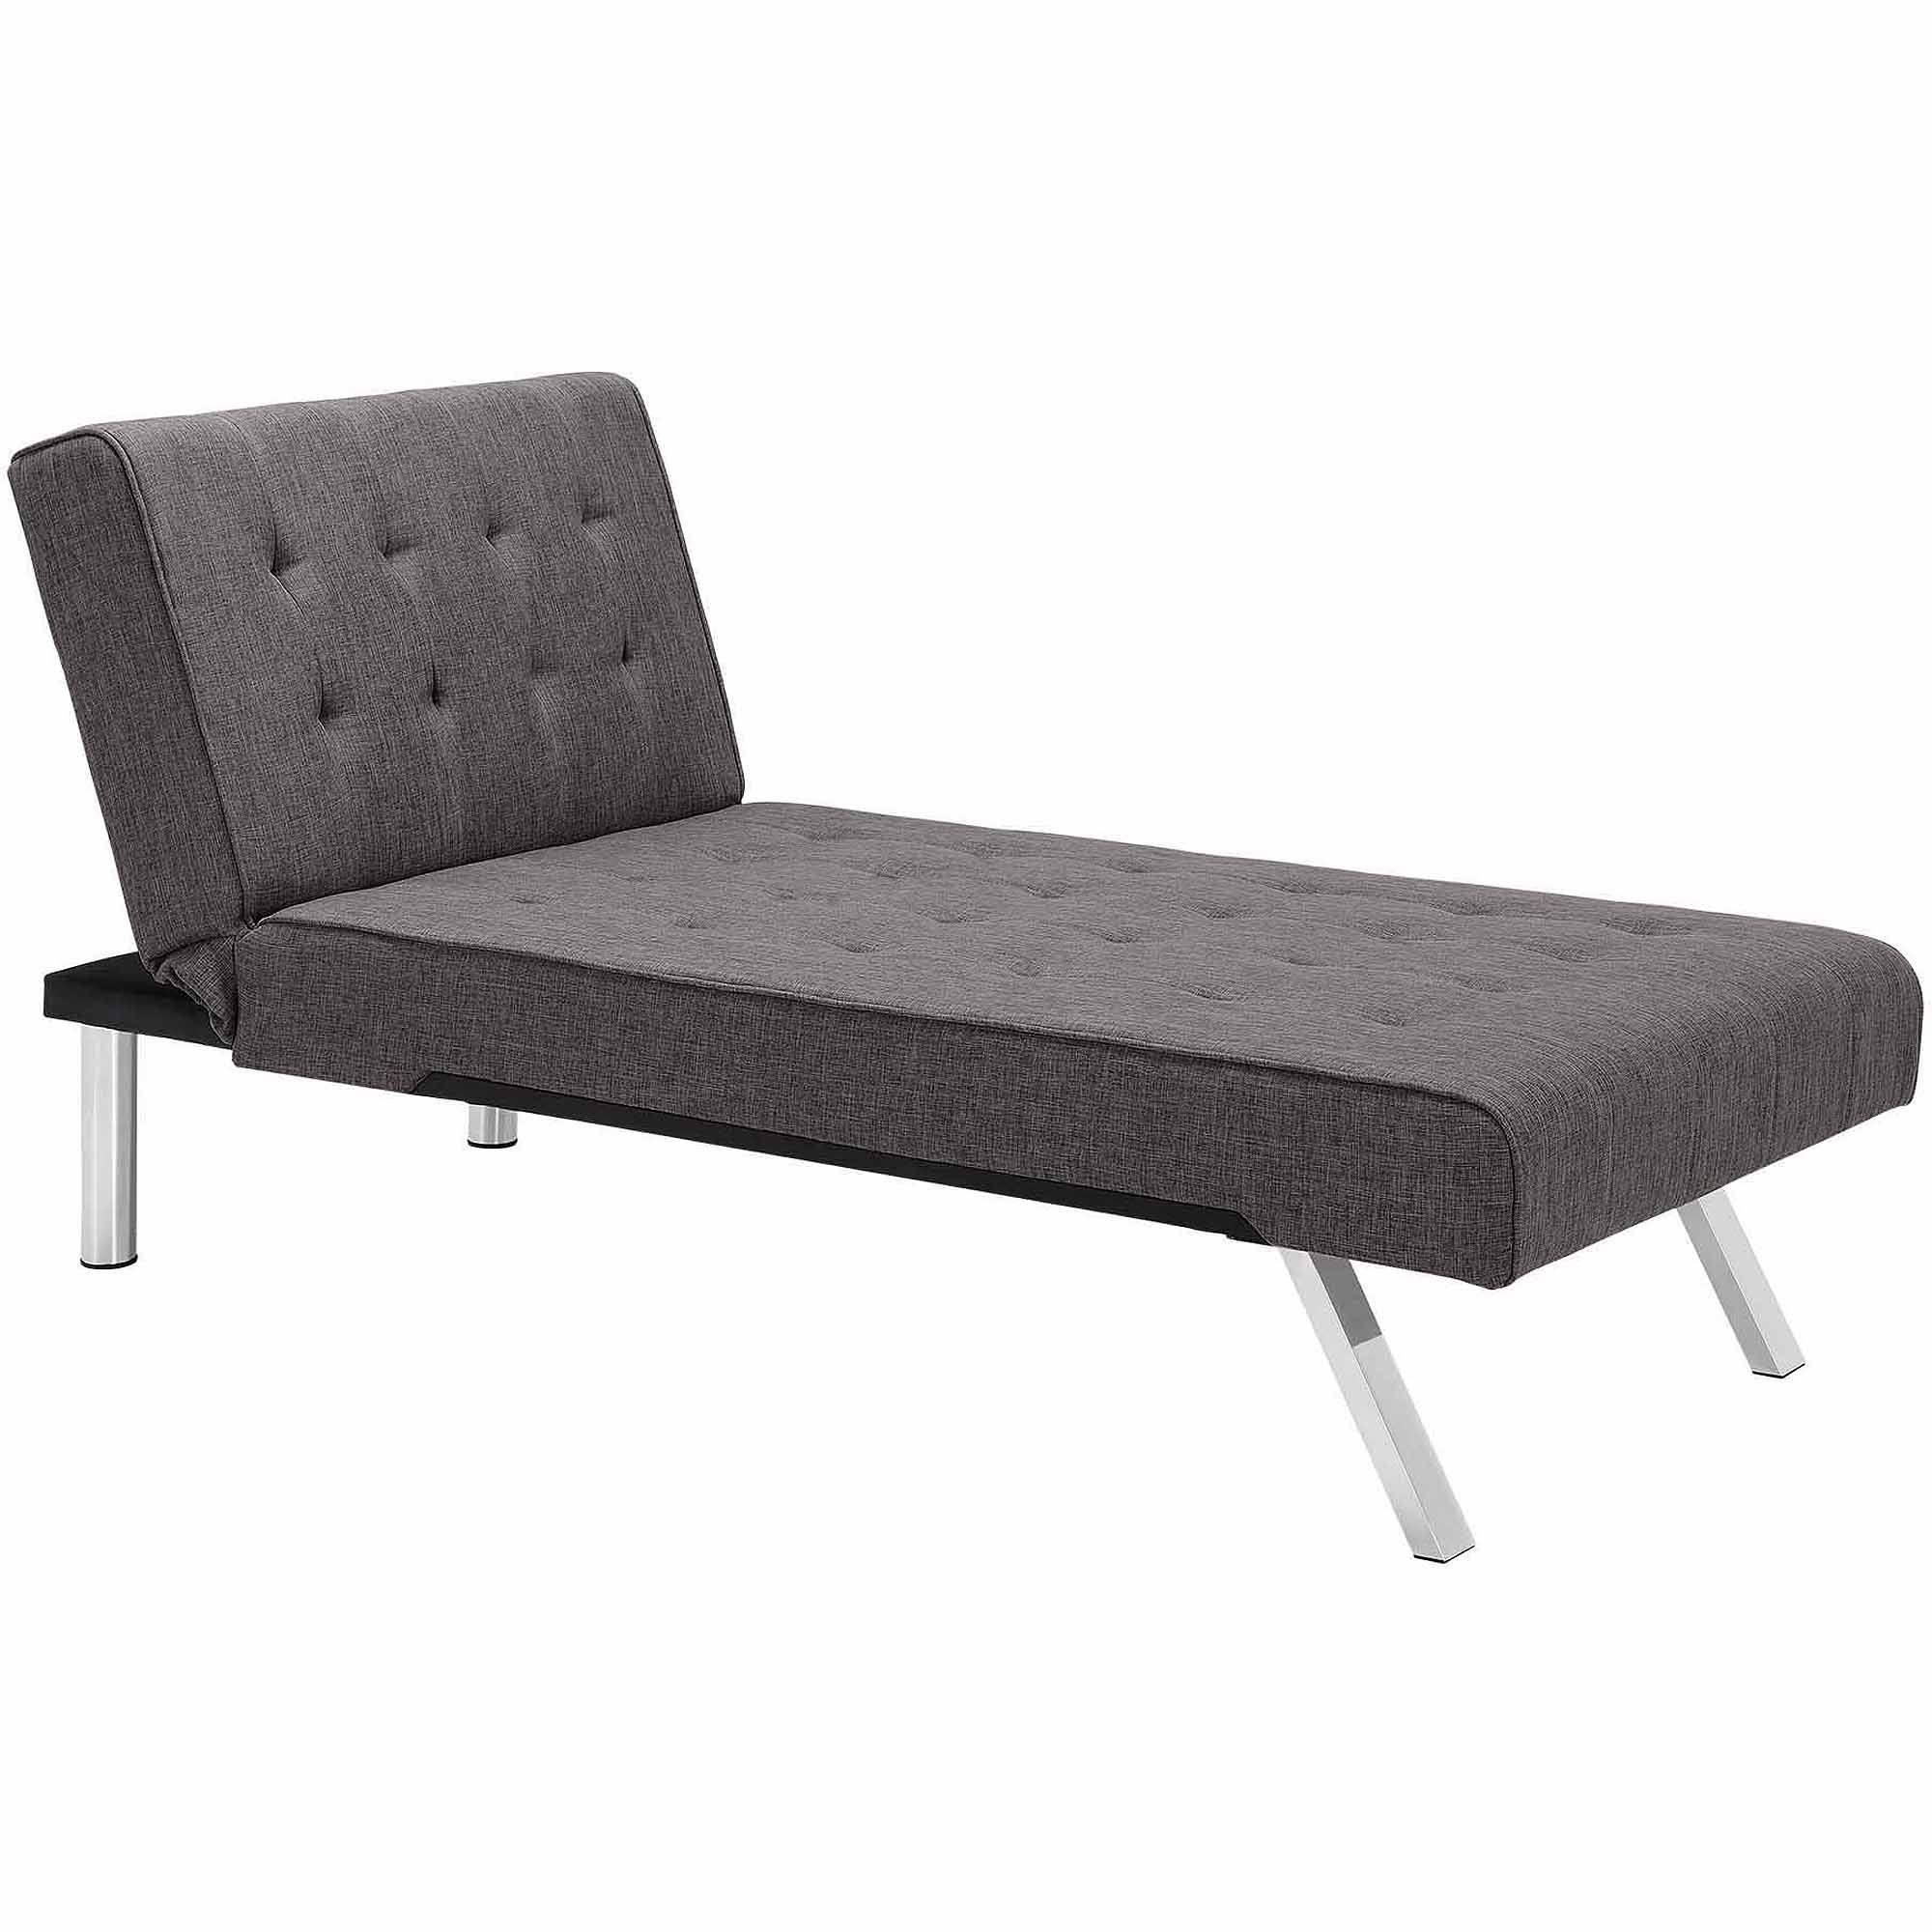 2018 Choice Throughout Futons With Chaise Lounge (View 4 of 15)